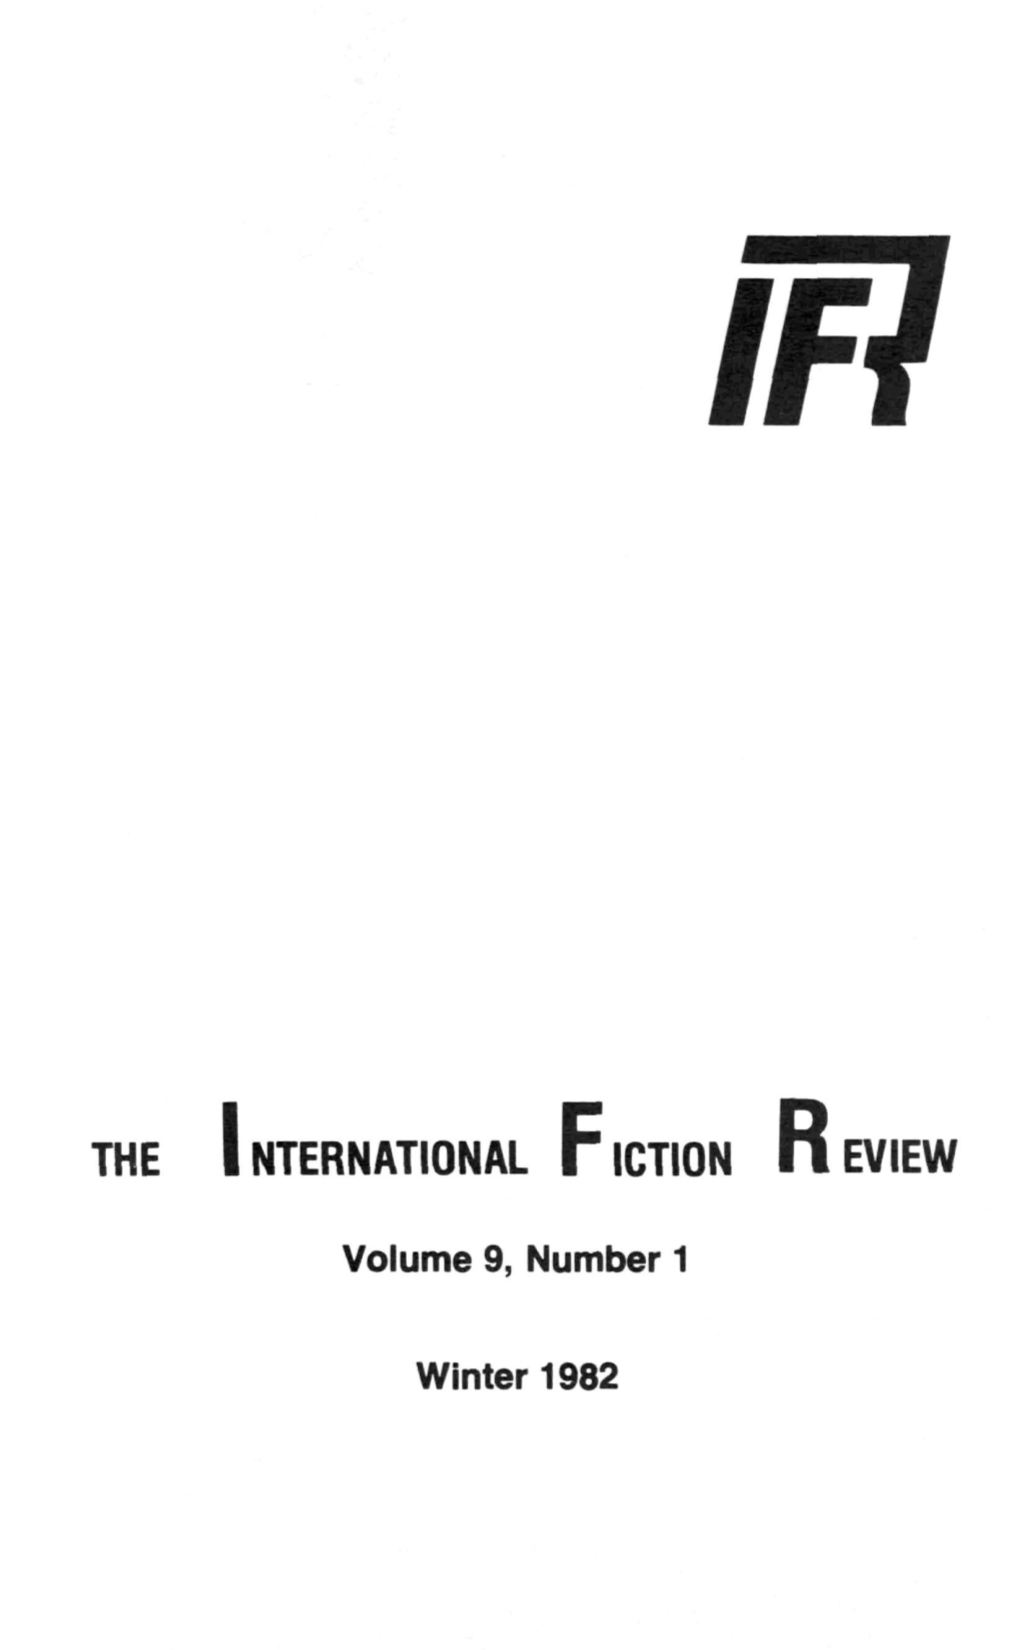 THE INTERNATIONAL Flction REVIEW